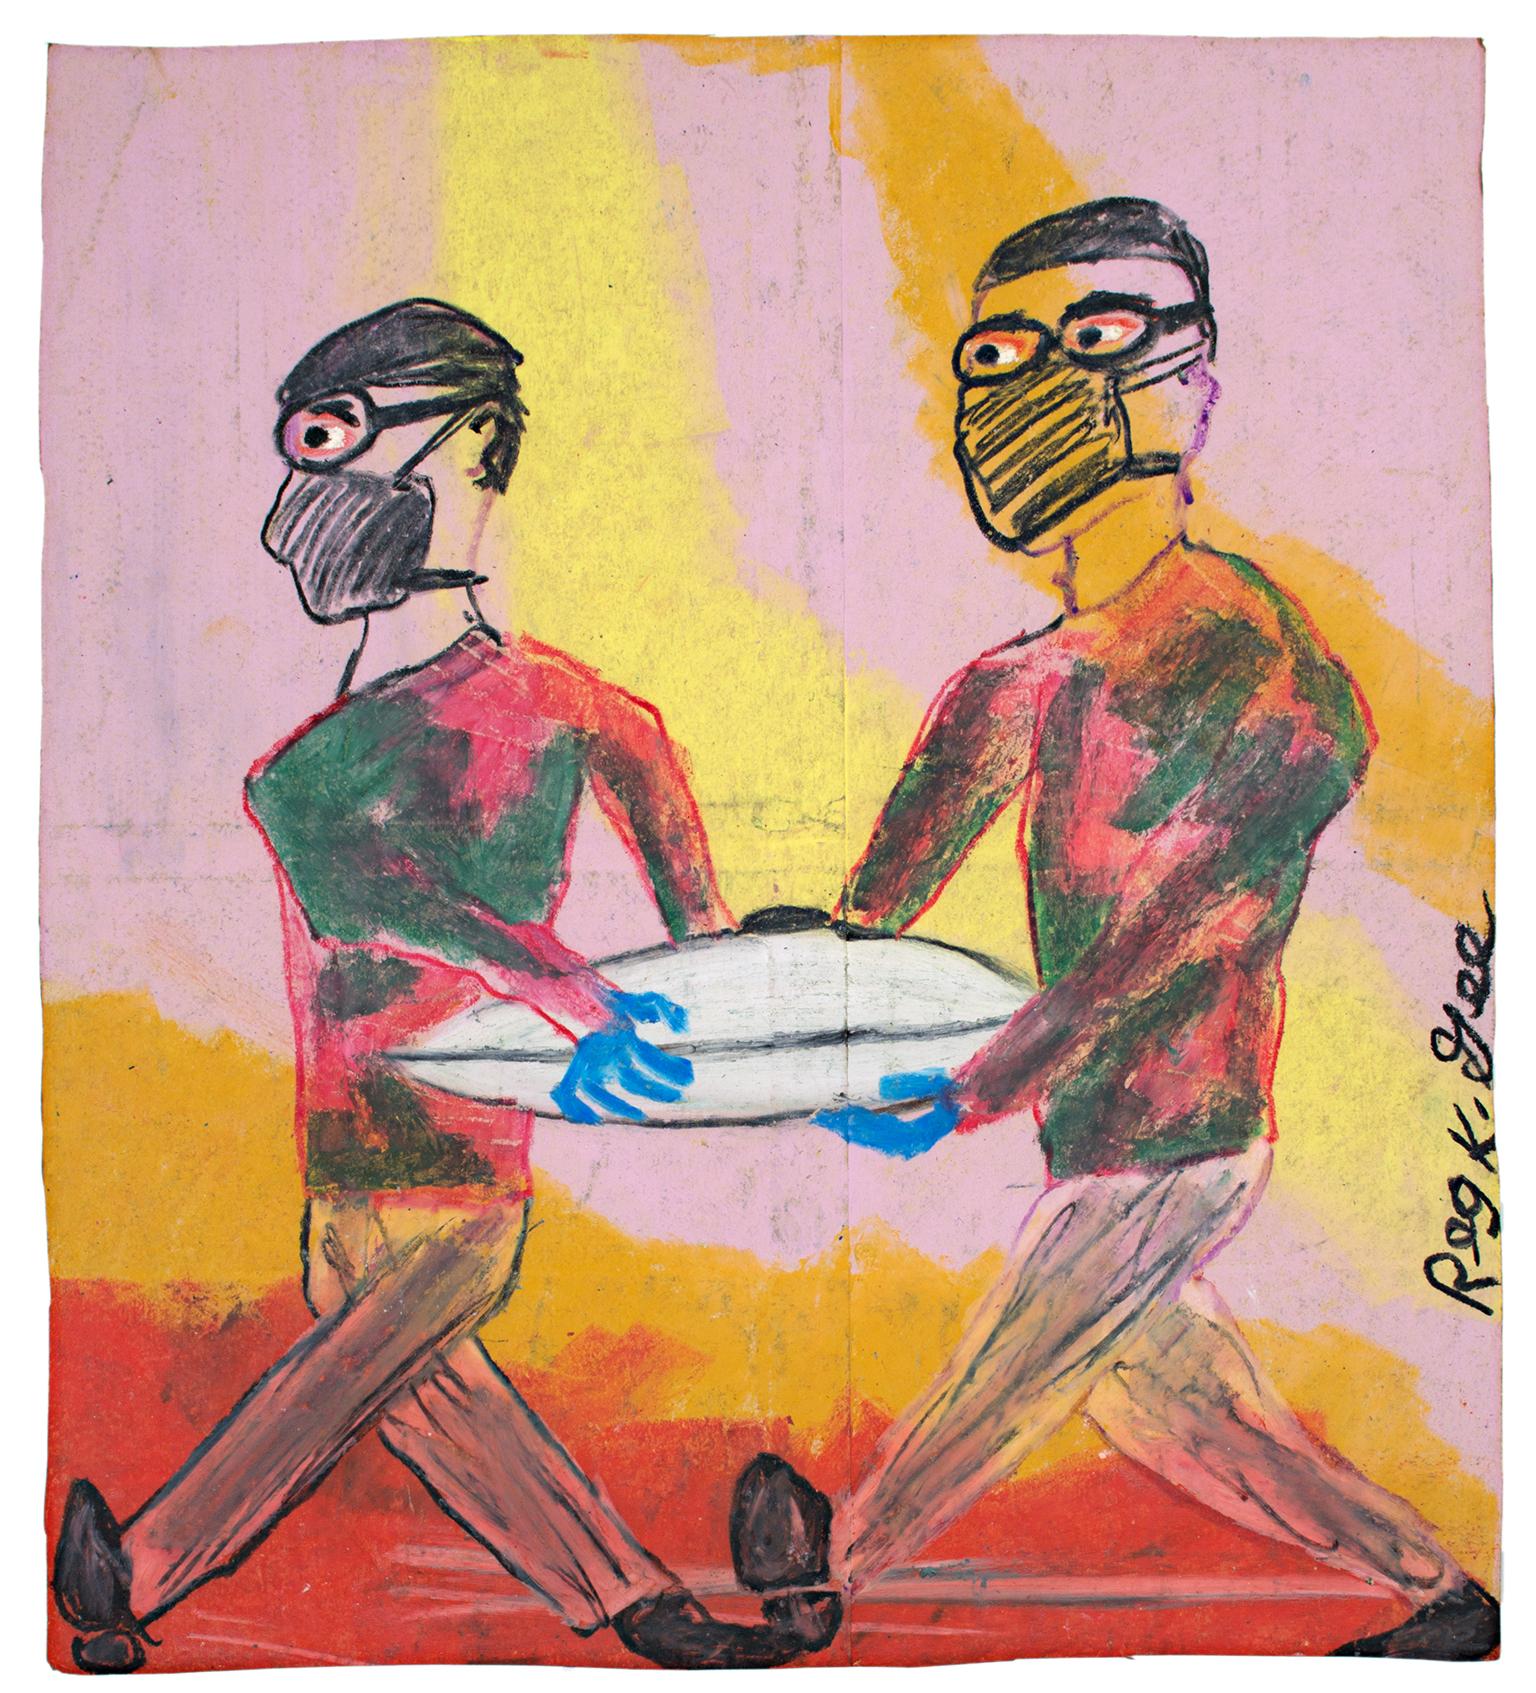 "Removing Saucer" is an original oil pastel drawing on a Safeway grocery bag by Reginald K. Gee. The artist signed the piece lower right. This piece features two men in face masks moving an unidentified flying object. They walk in front of a pink,